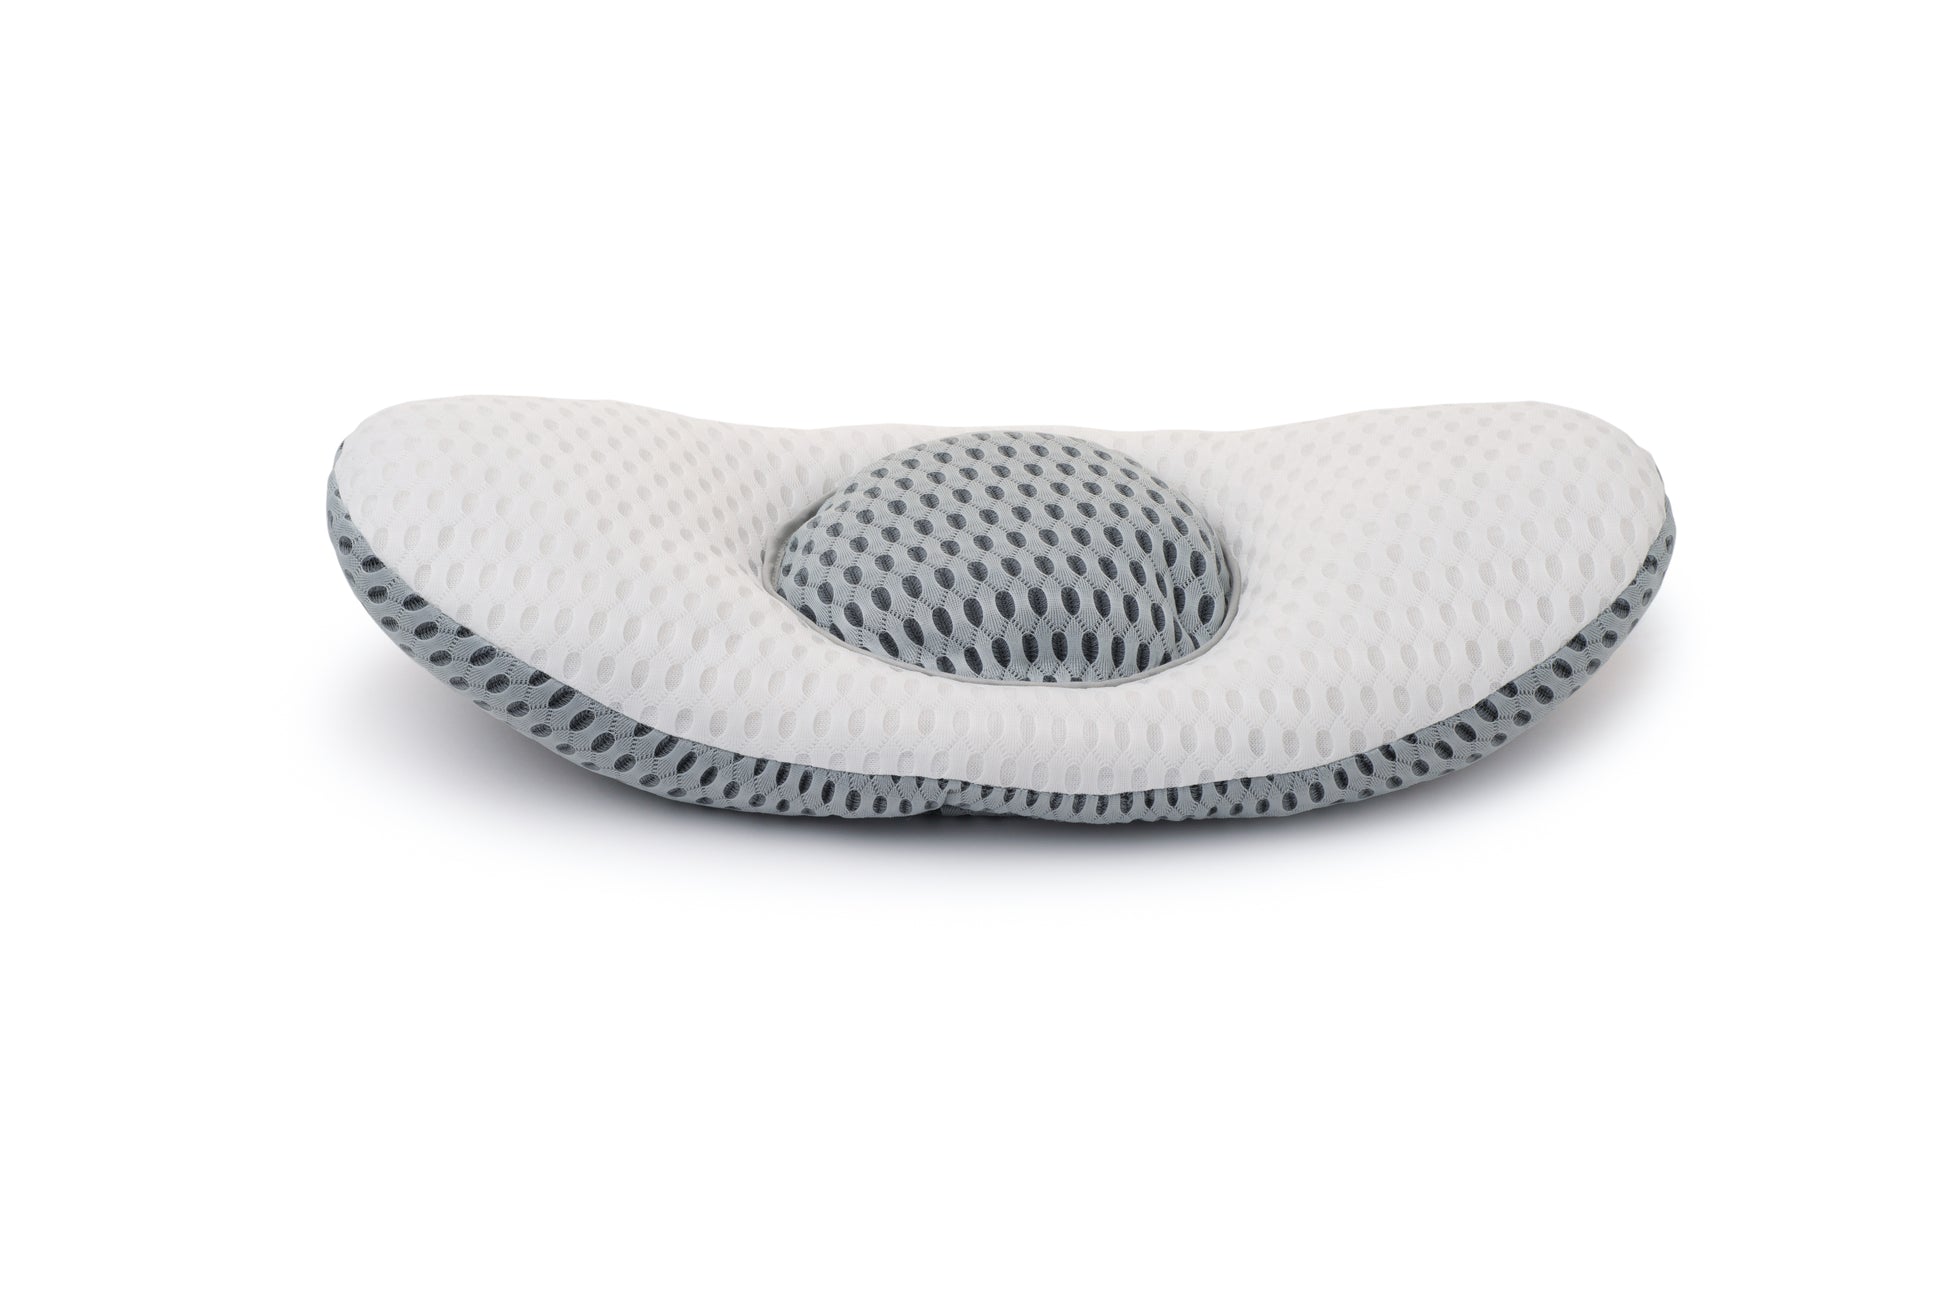 Elevate-your-sleep-experience-with-Importikaah's-lumbar-pillows